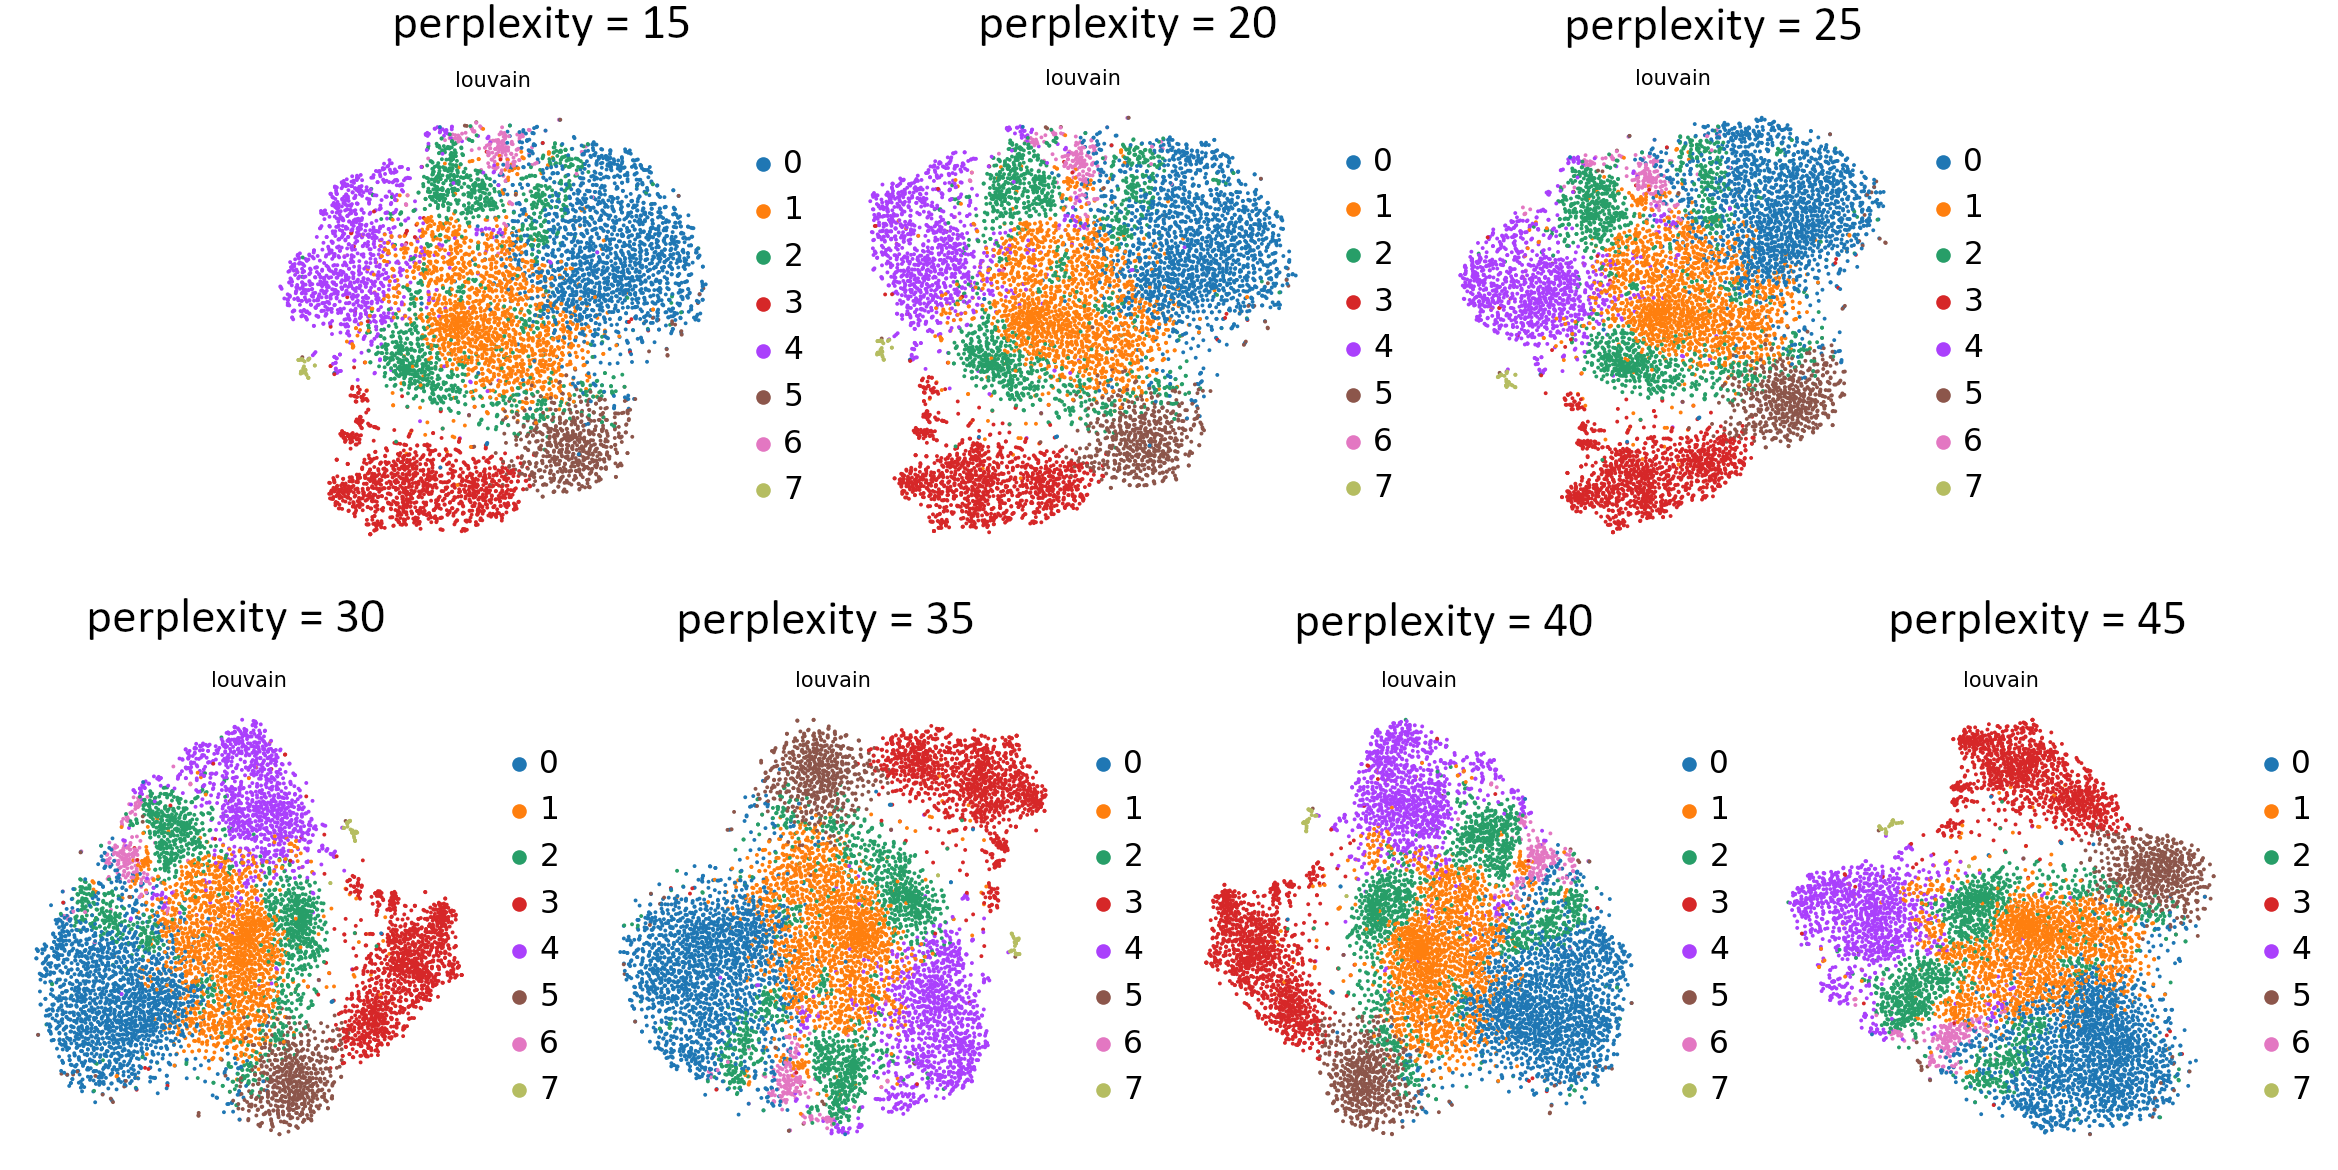 Graphs showing the differences between tSNE embeddings caused by different values of perplexity.